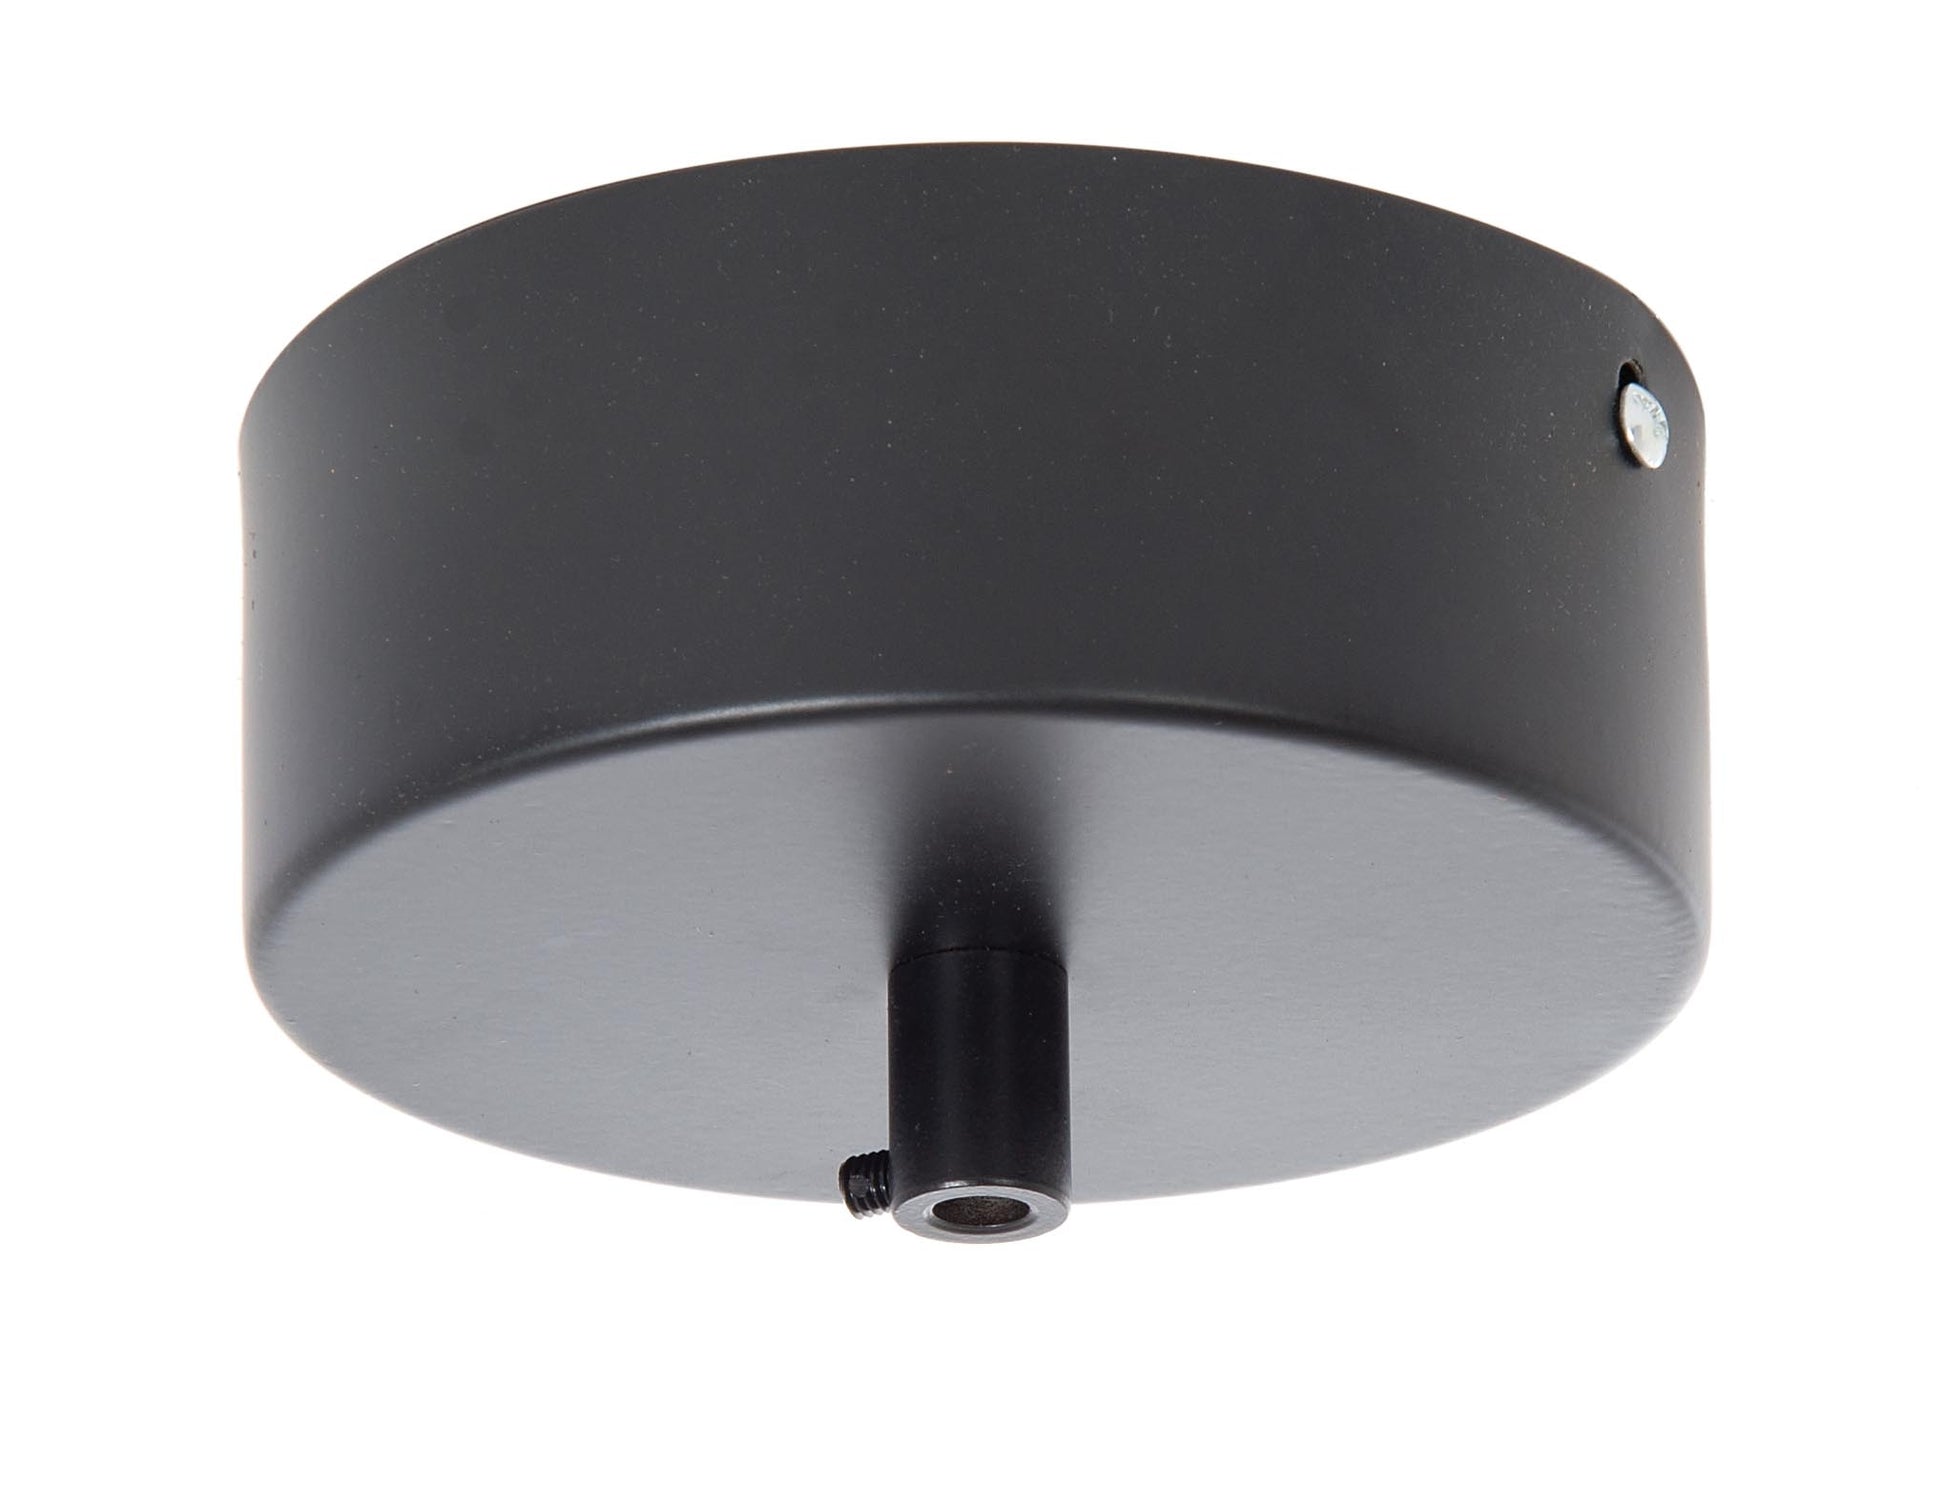 Satin Black Finish Pendant Canopy Kit To Mount LED Driver 5" wide by 2" tall